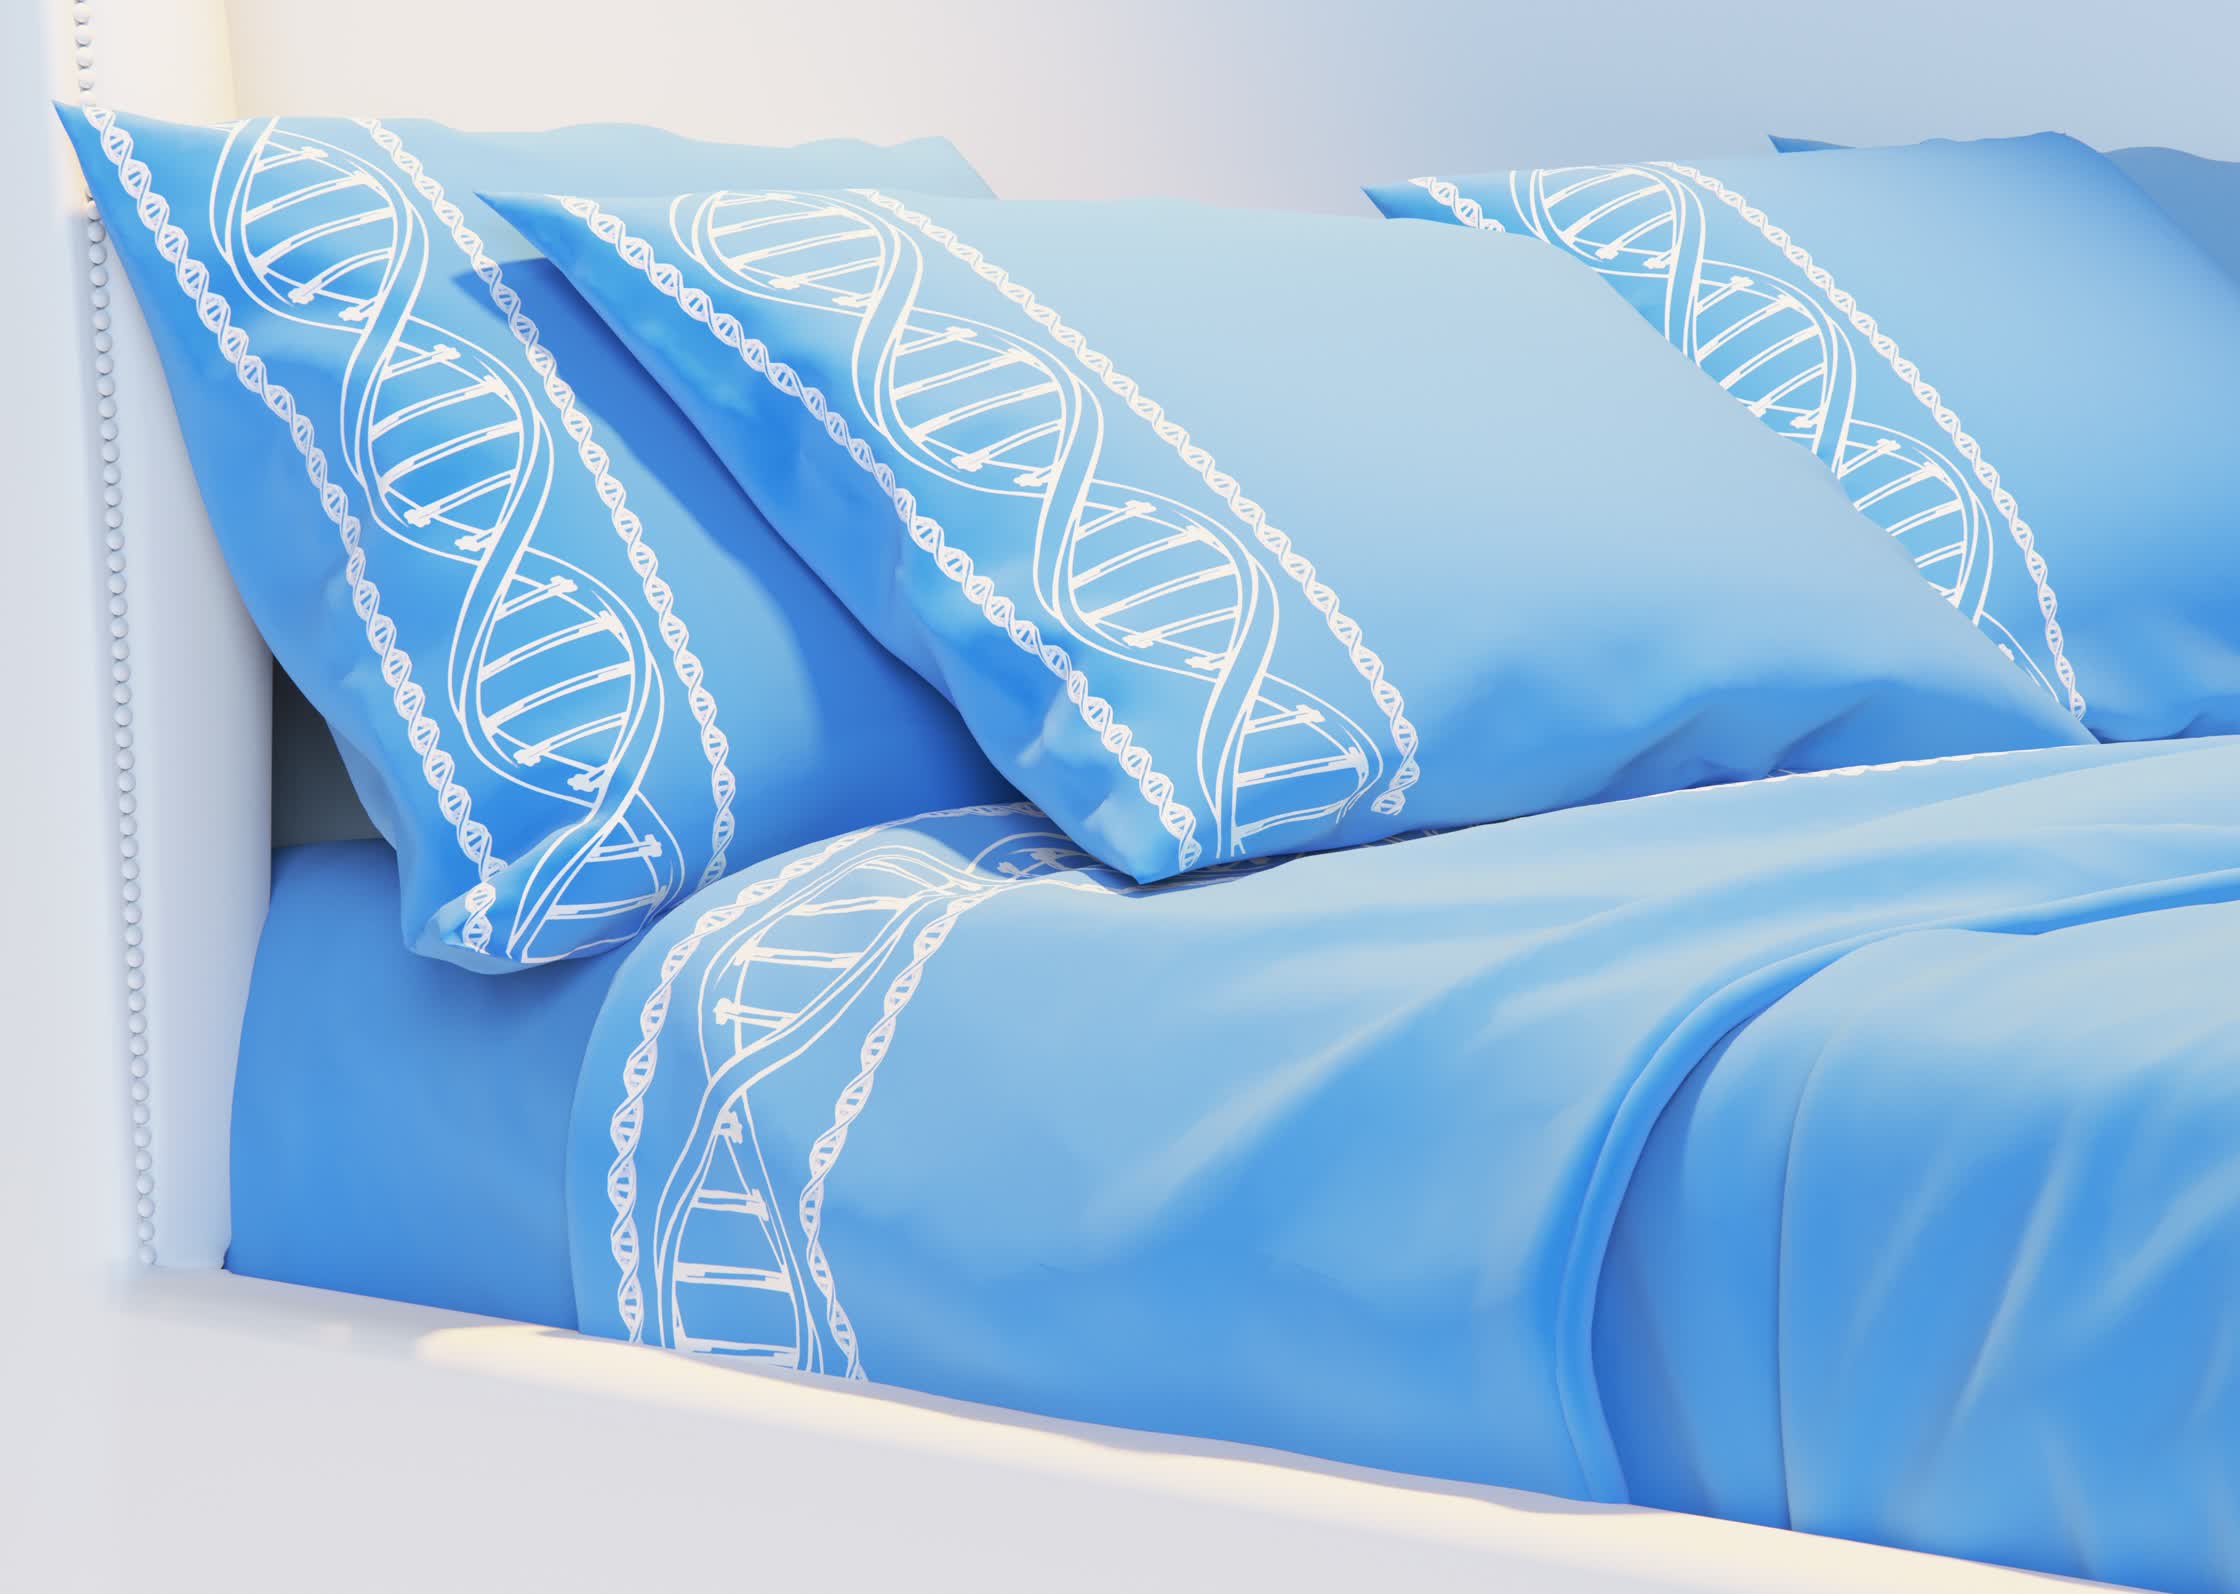 DNA bed sheets_PreventionMagazineUSA_pcrowther.jpg